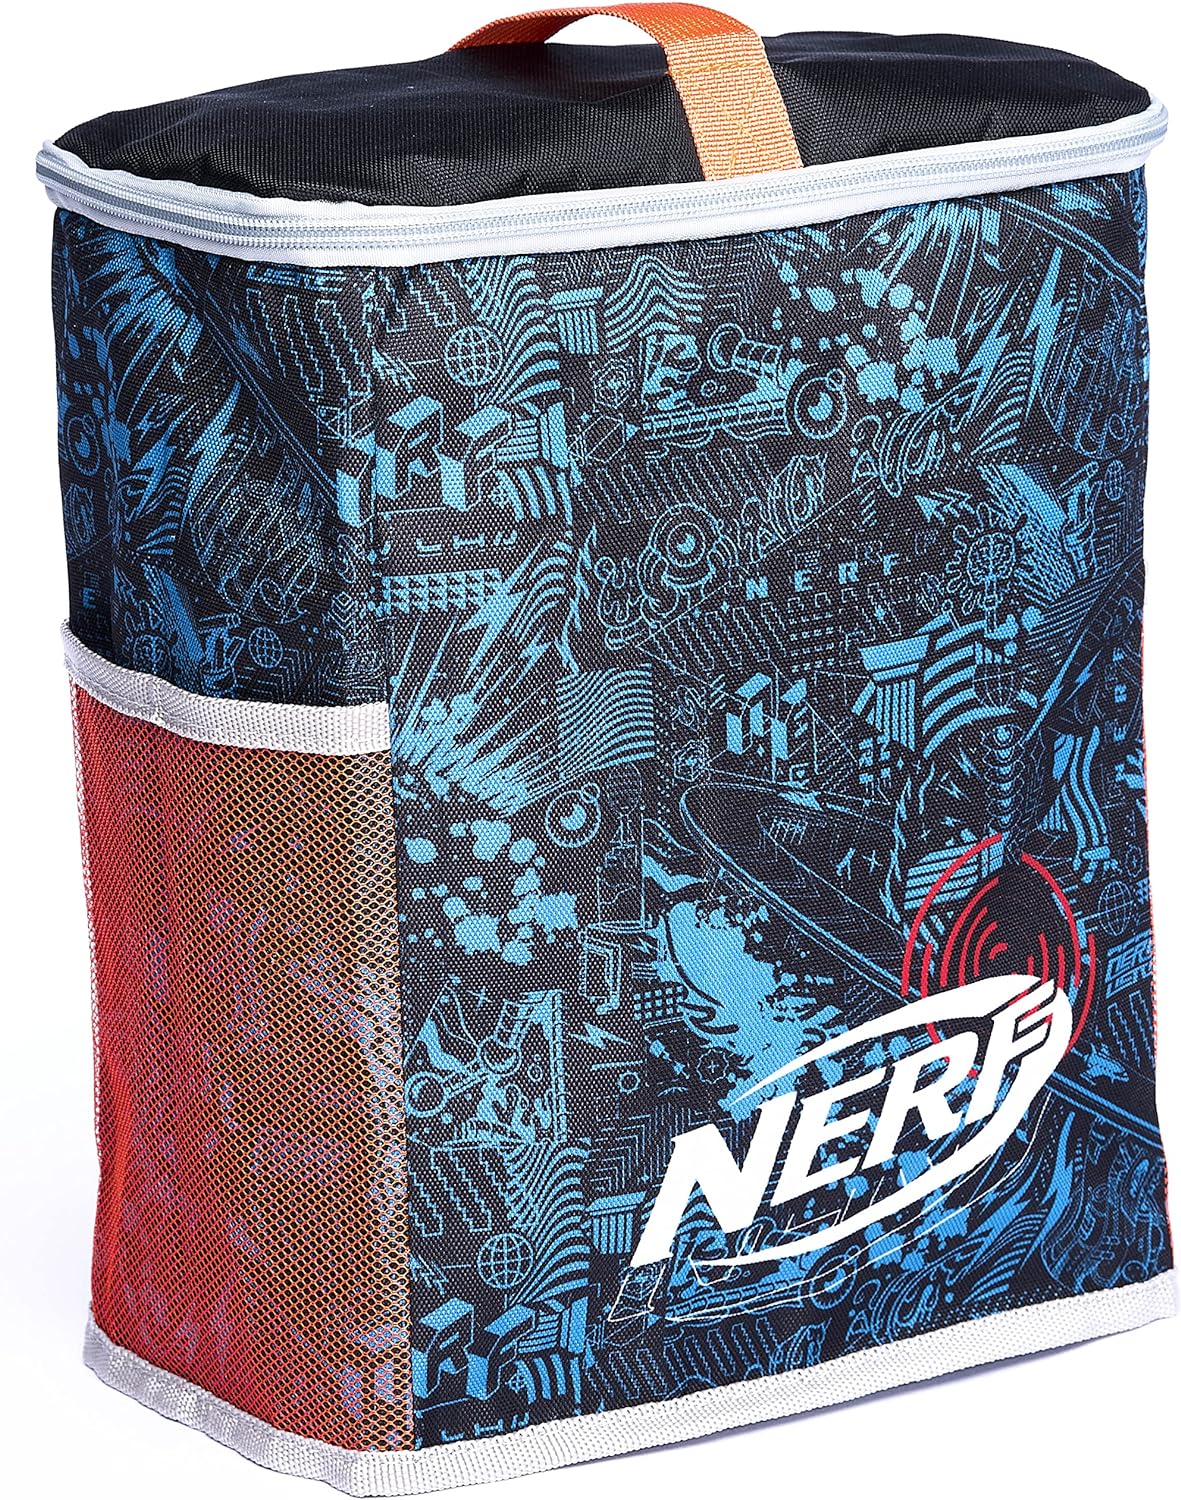 NERF BUNKR Officially Licensed Ready Reload Bag Storage and Transport for Nerf Foam Darts and Rounds - Perfect for Nerf Party Nerf War